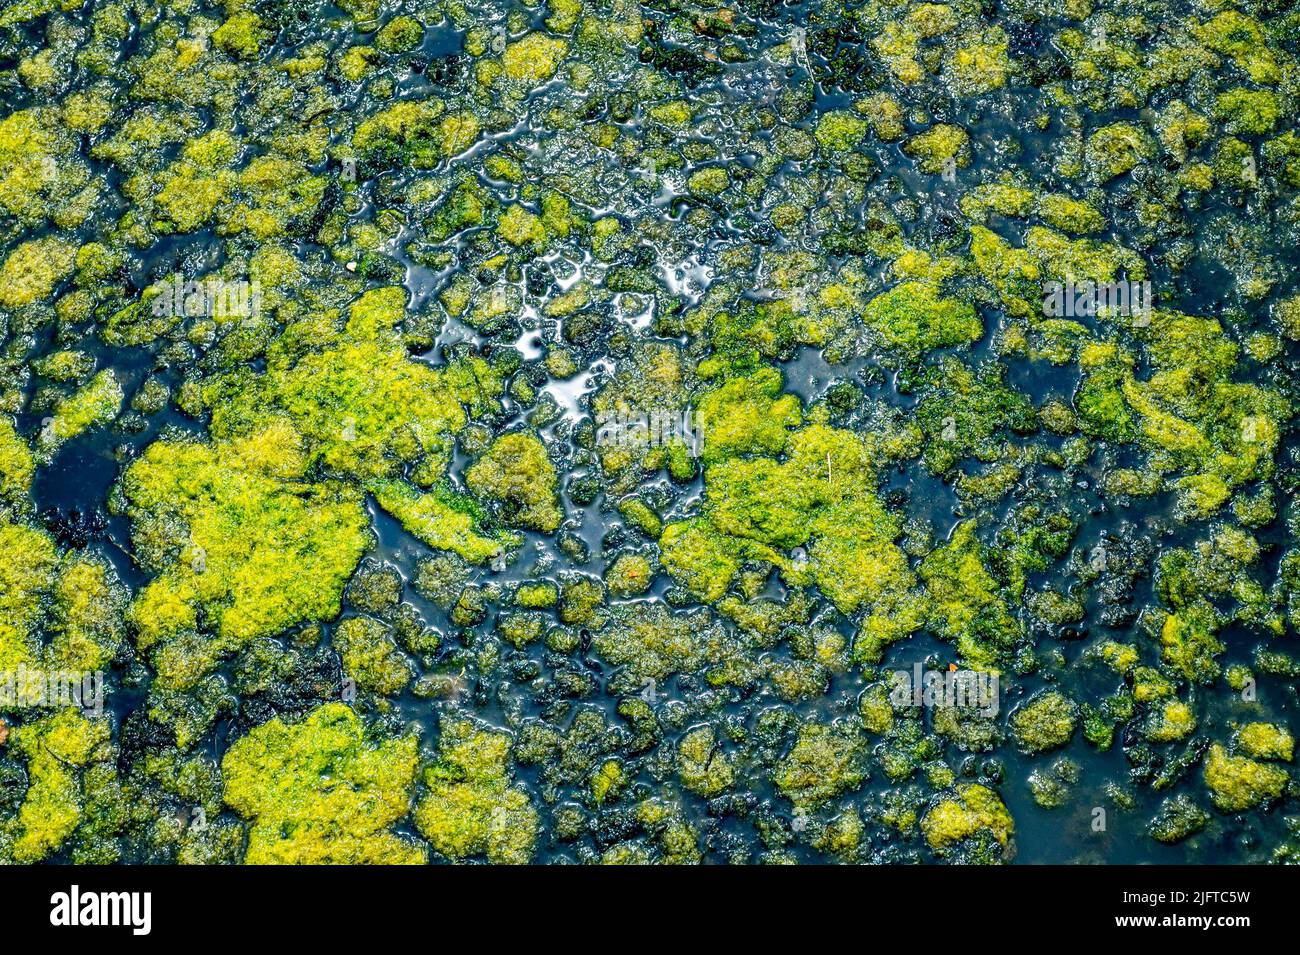 Cuckmere Haven & Seaford East Sussex England UK - Green algae and plant shapes in stale sea water pool Stock Photo